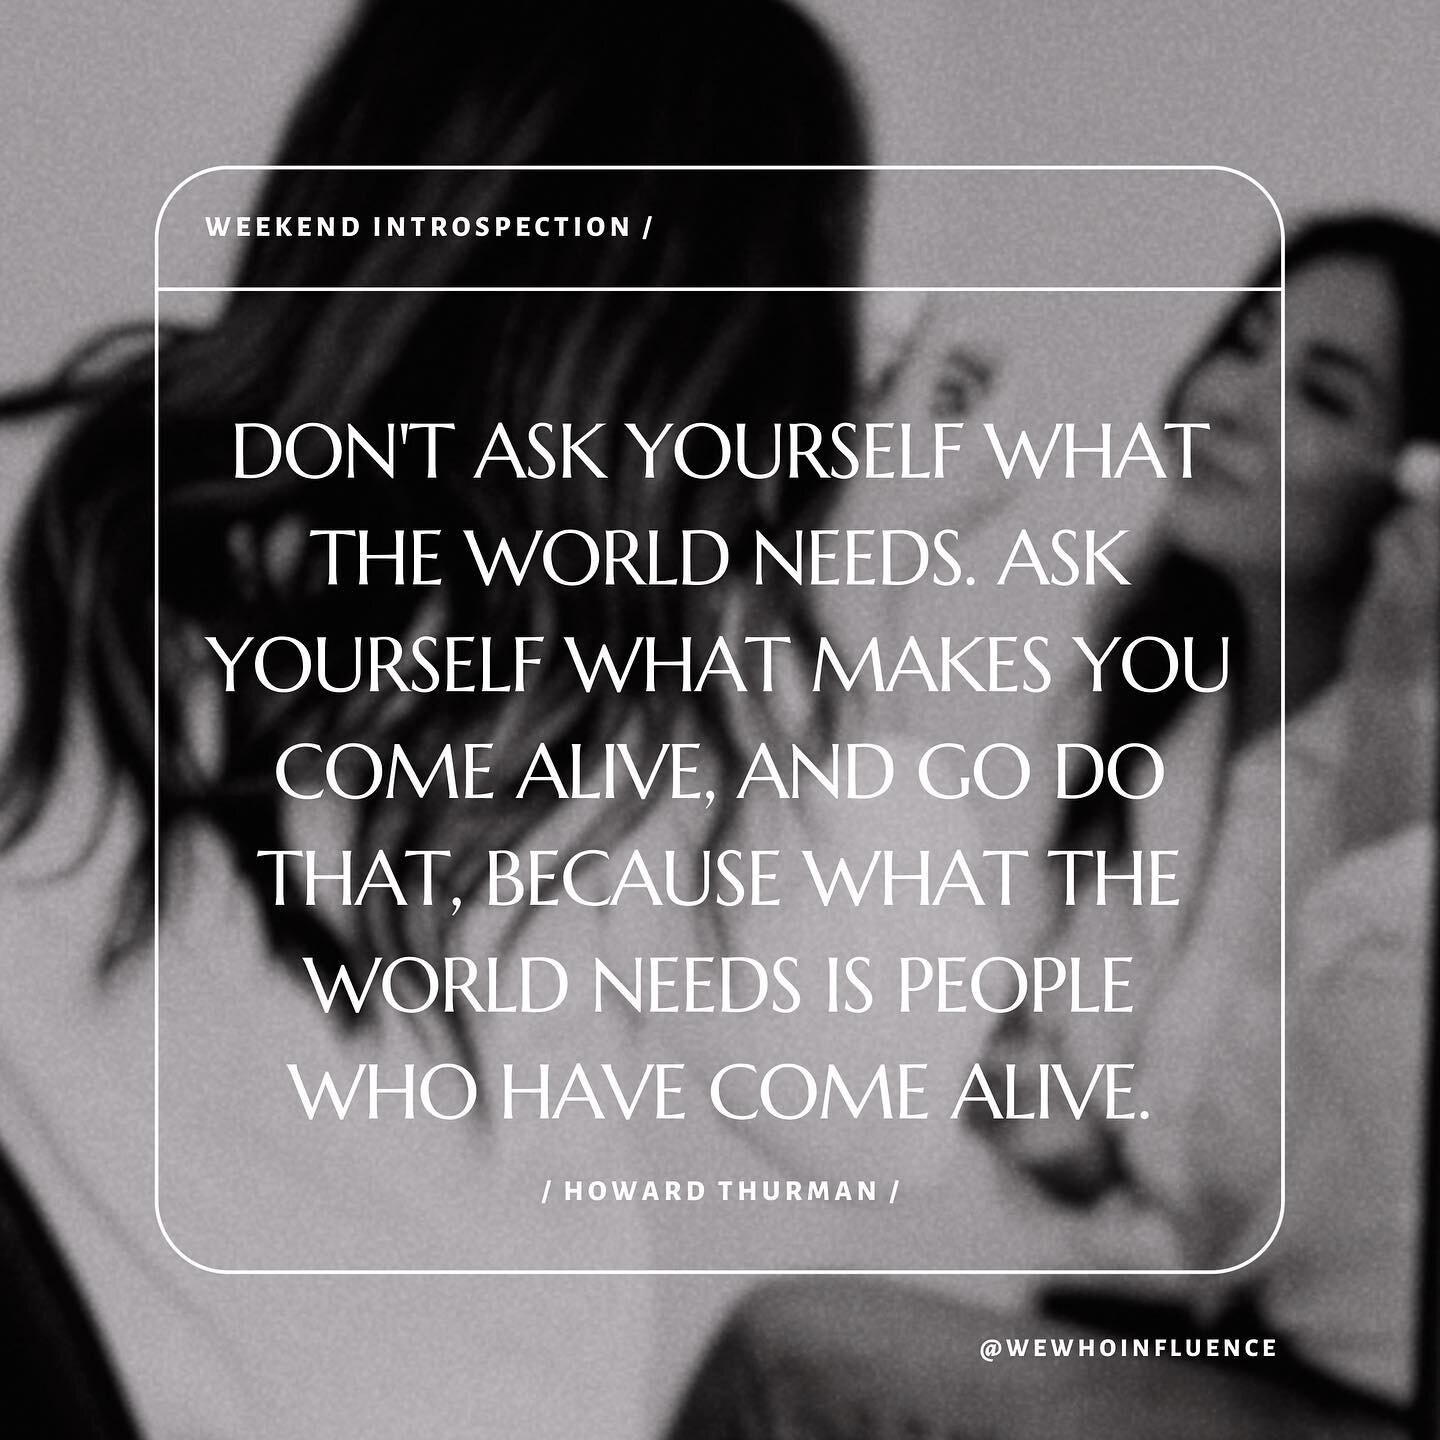 What makes you come alive?